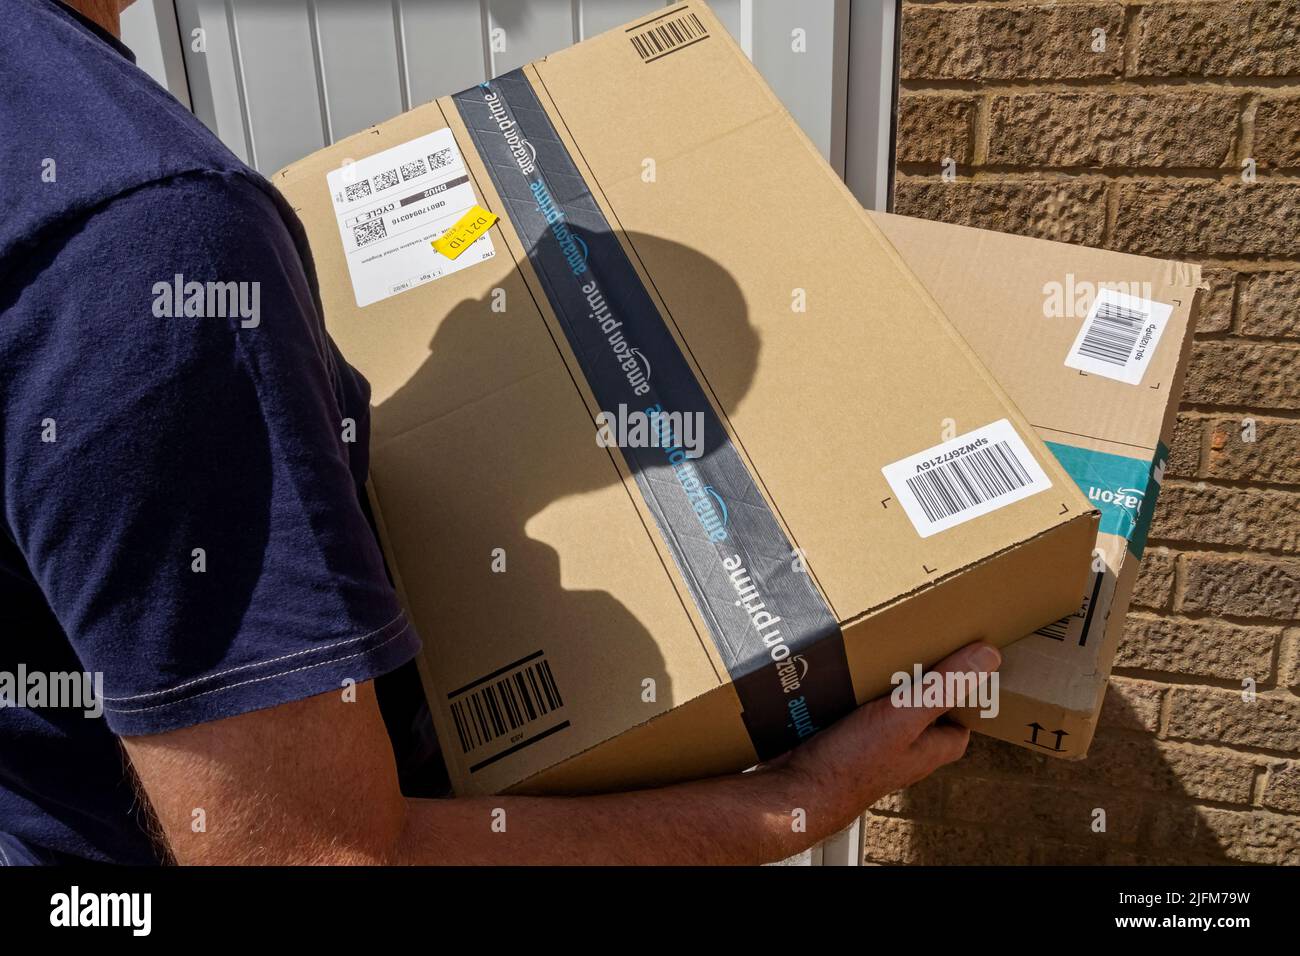 Delivery driver man person holding carrying delivering online shopping Amazon prime box boxes delivery parcels parcel England UK Britain Stock Photo